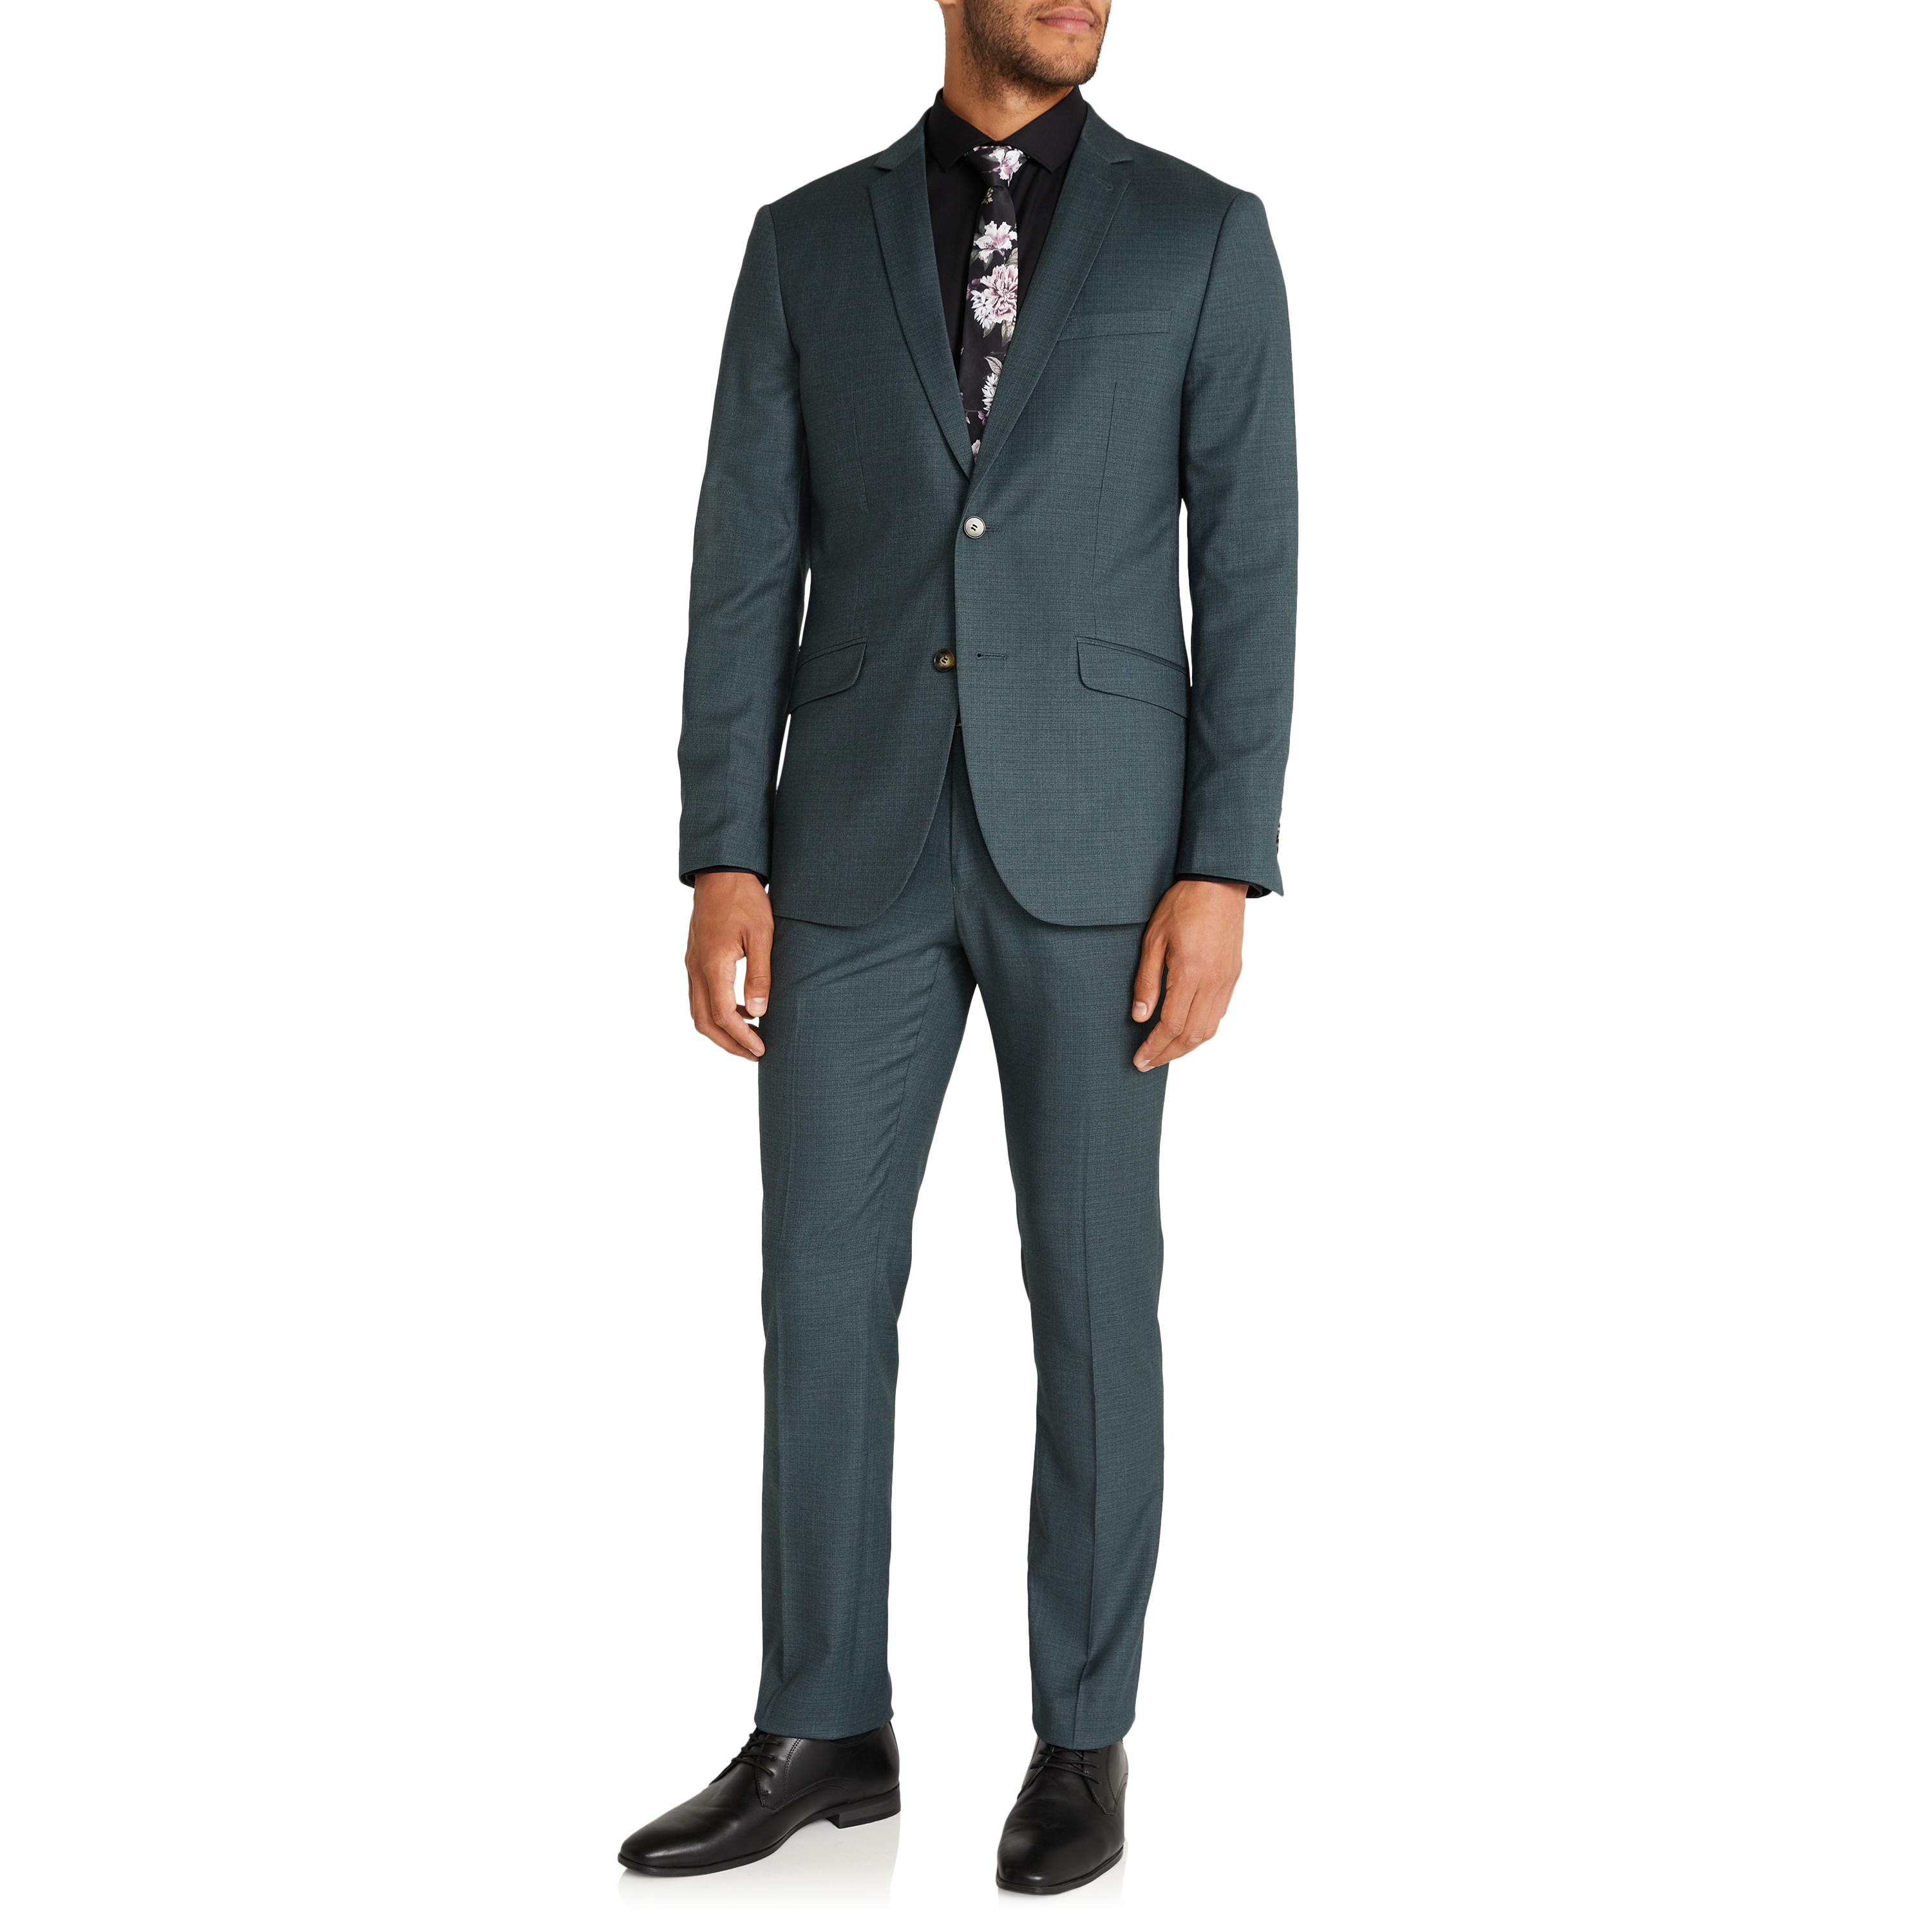 Men's Suits - Single, Double Breasted & 3 Piece Suits | SUITSUPPLY The  Netherlands